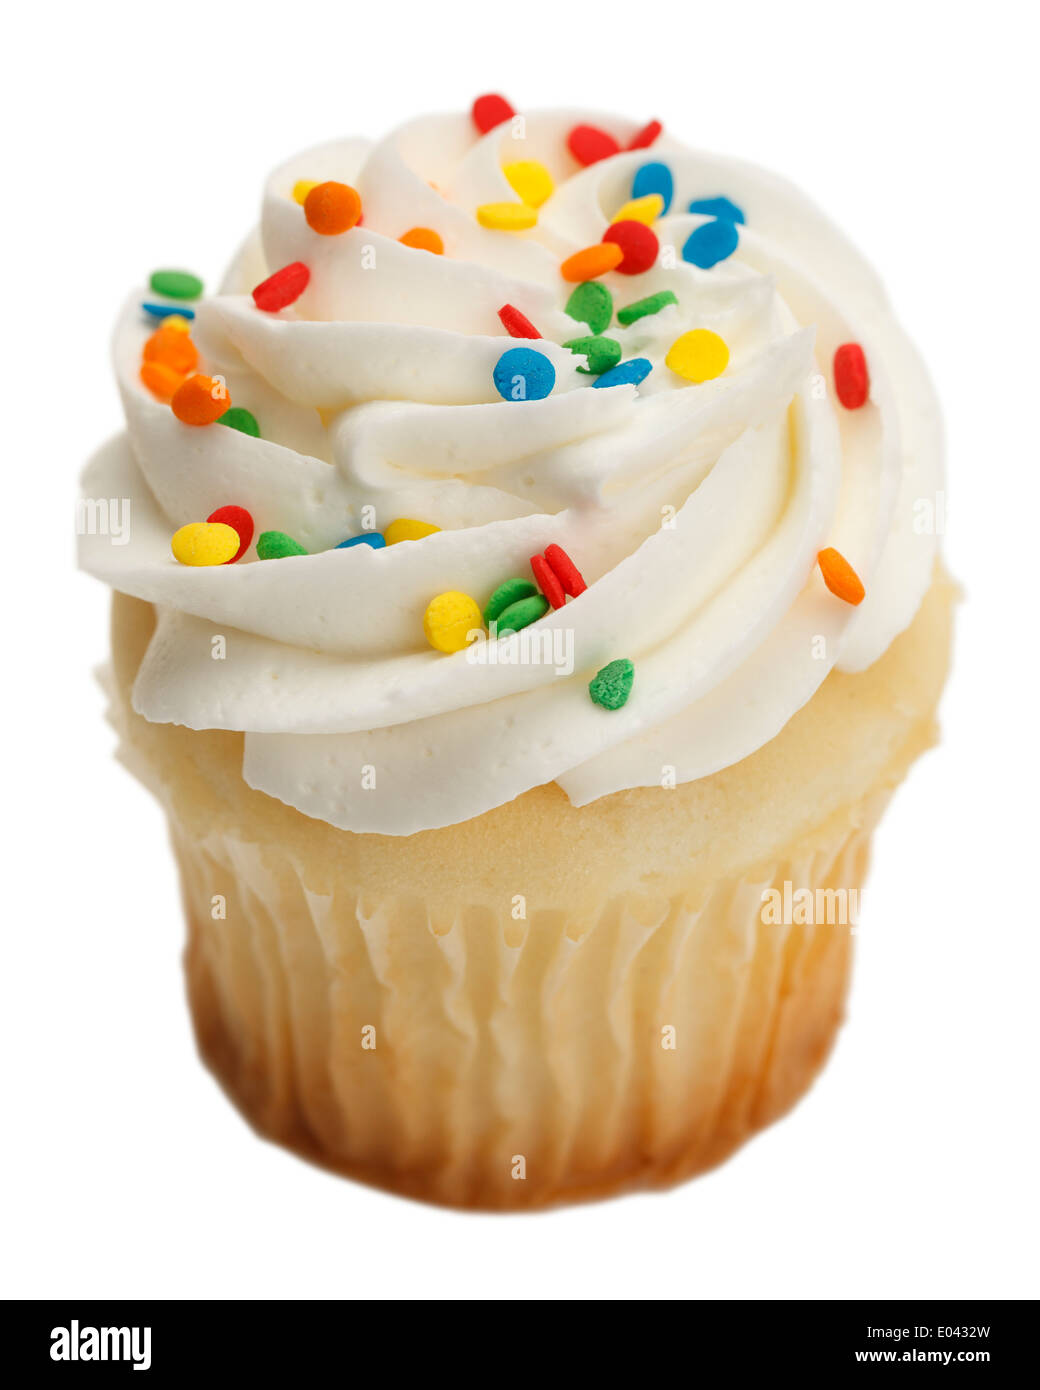 Single Cupcake with White Frosting and Sprinkles Isolated On White Background. Stock Photo